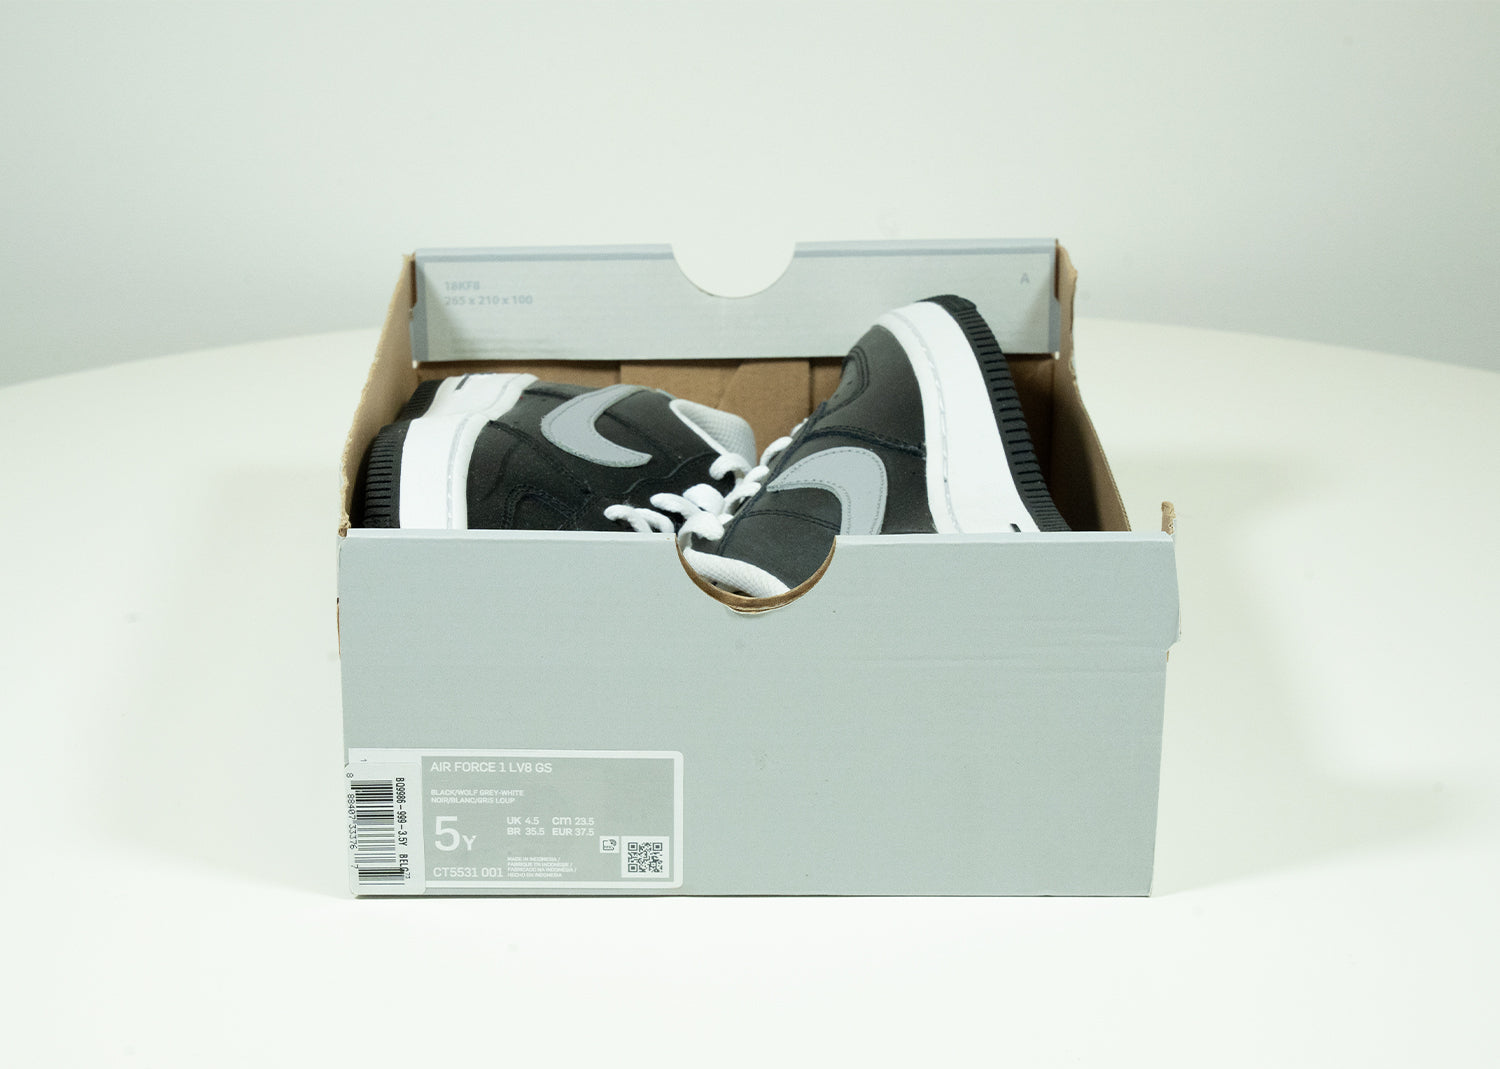 Second Chance - Nike Air bell 1 Black Sport GS - 37,5 | NEW